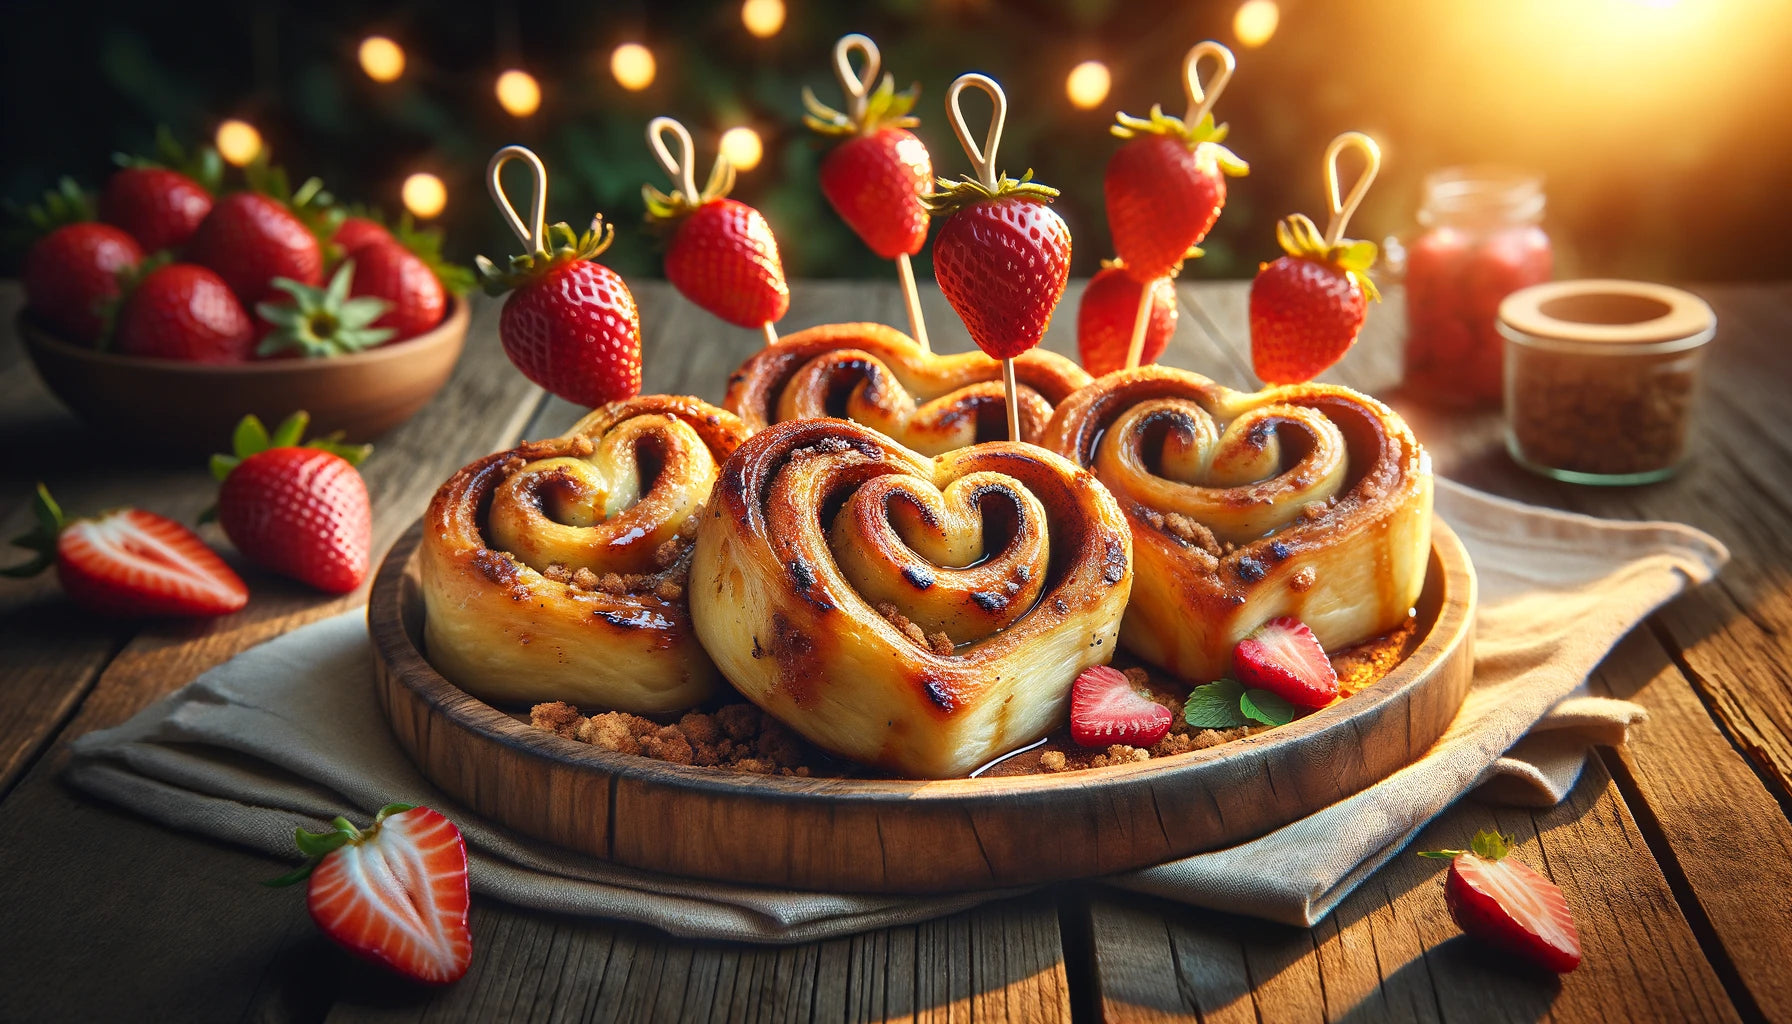 Grilled Cinnamon Roll Hearts with Strawberry Skewers & Pork Panko